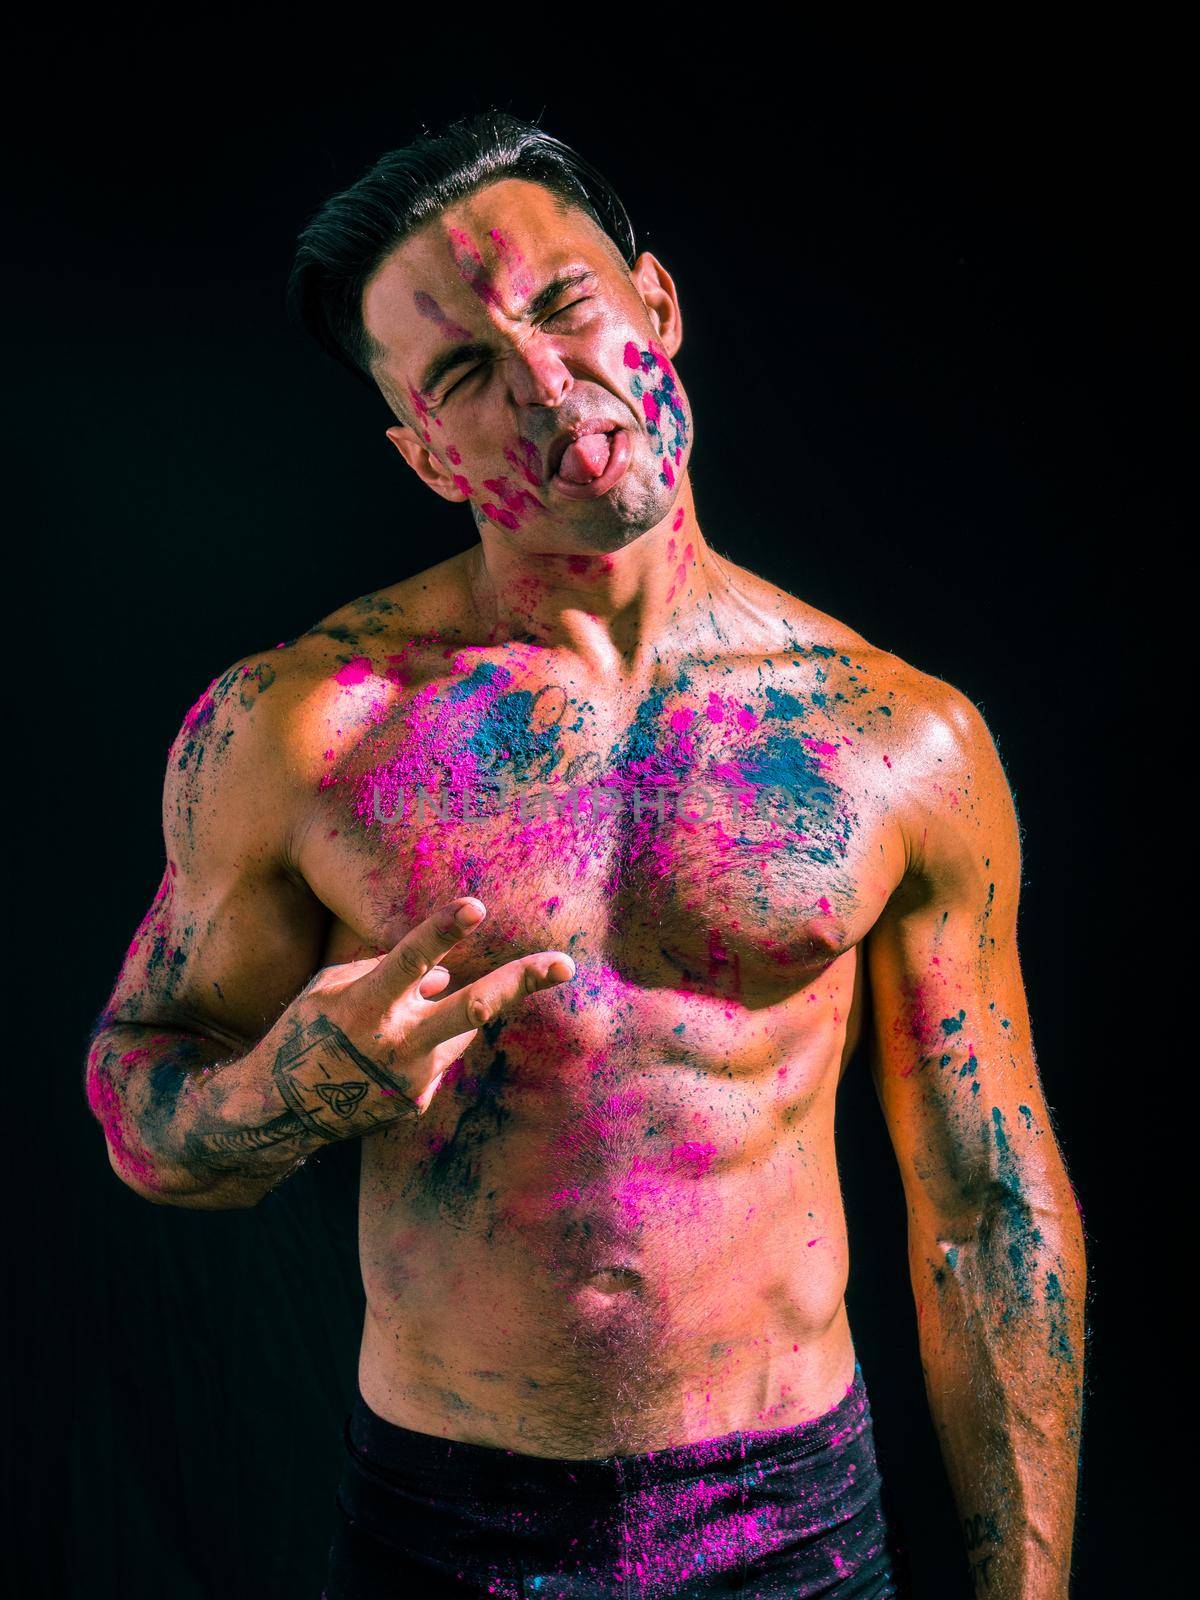 Muscular man shirtless with skin painted with Holi colors by artofphoto